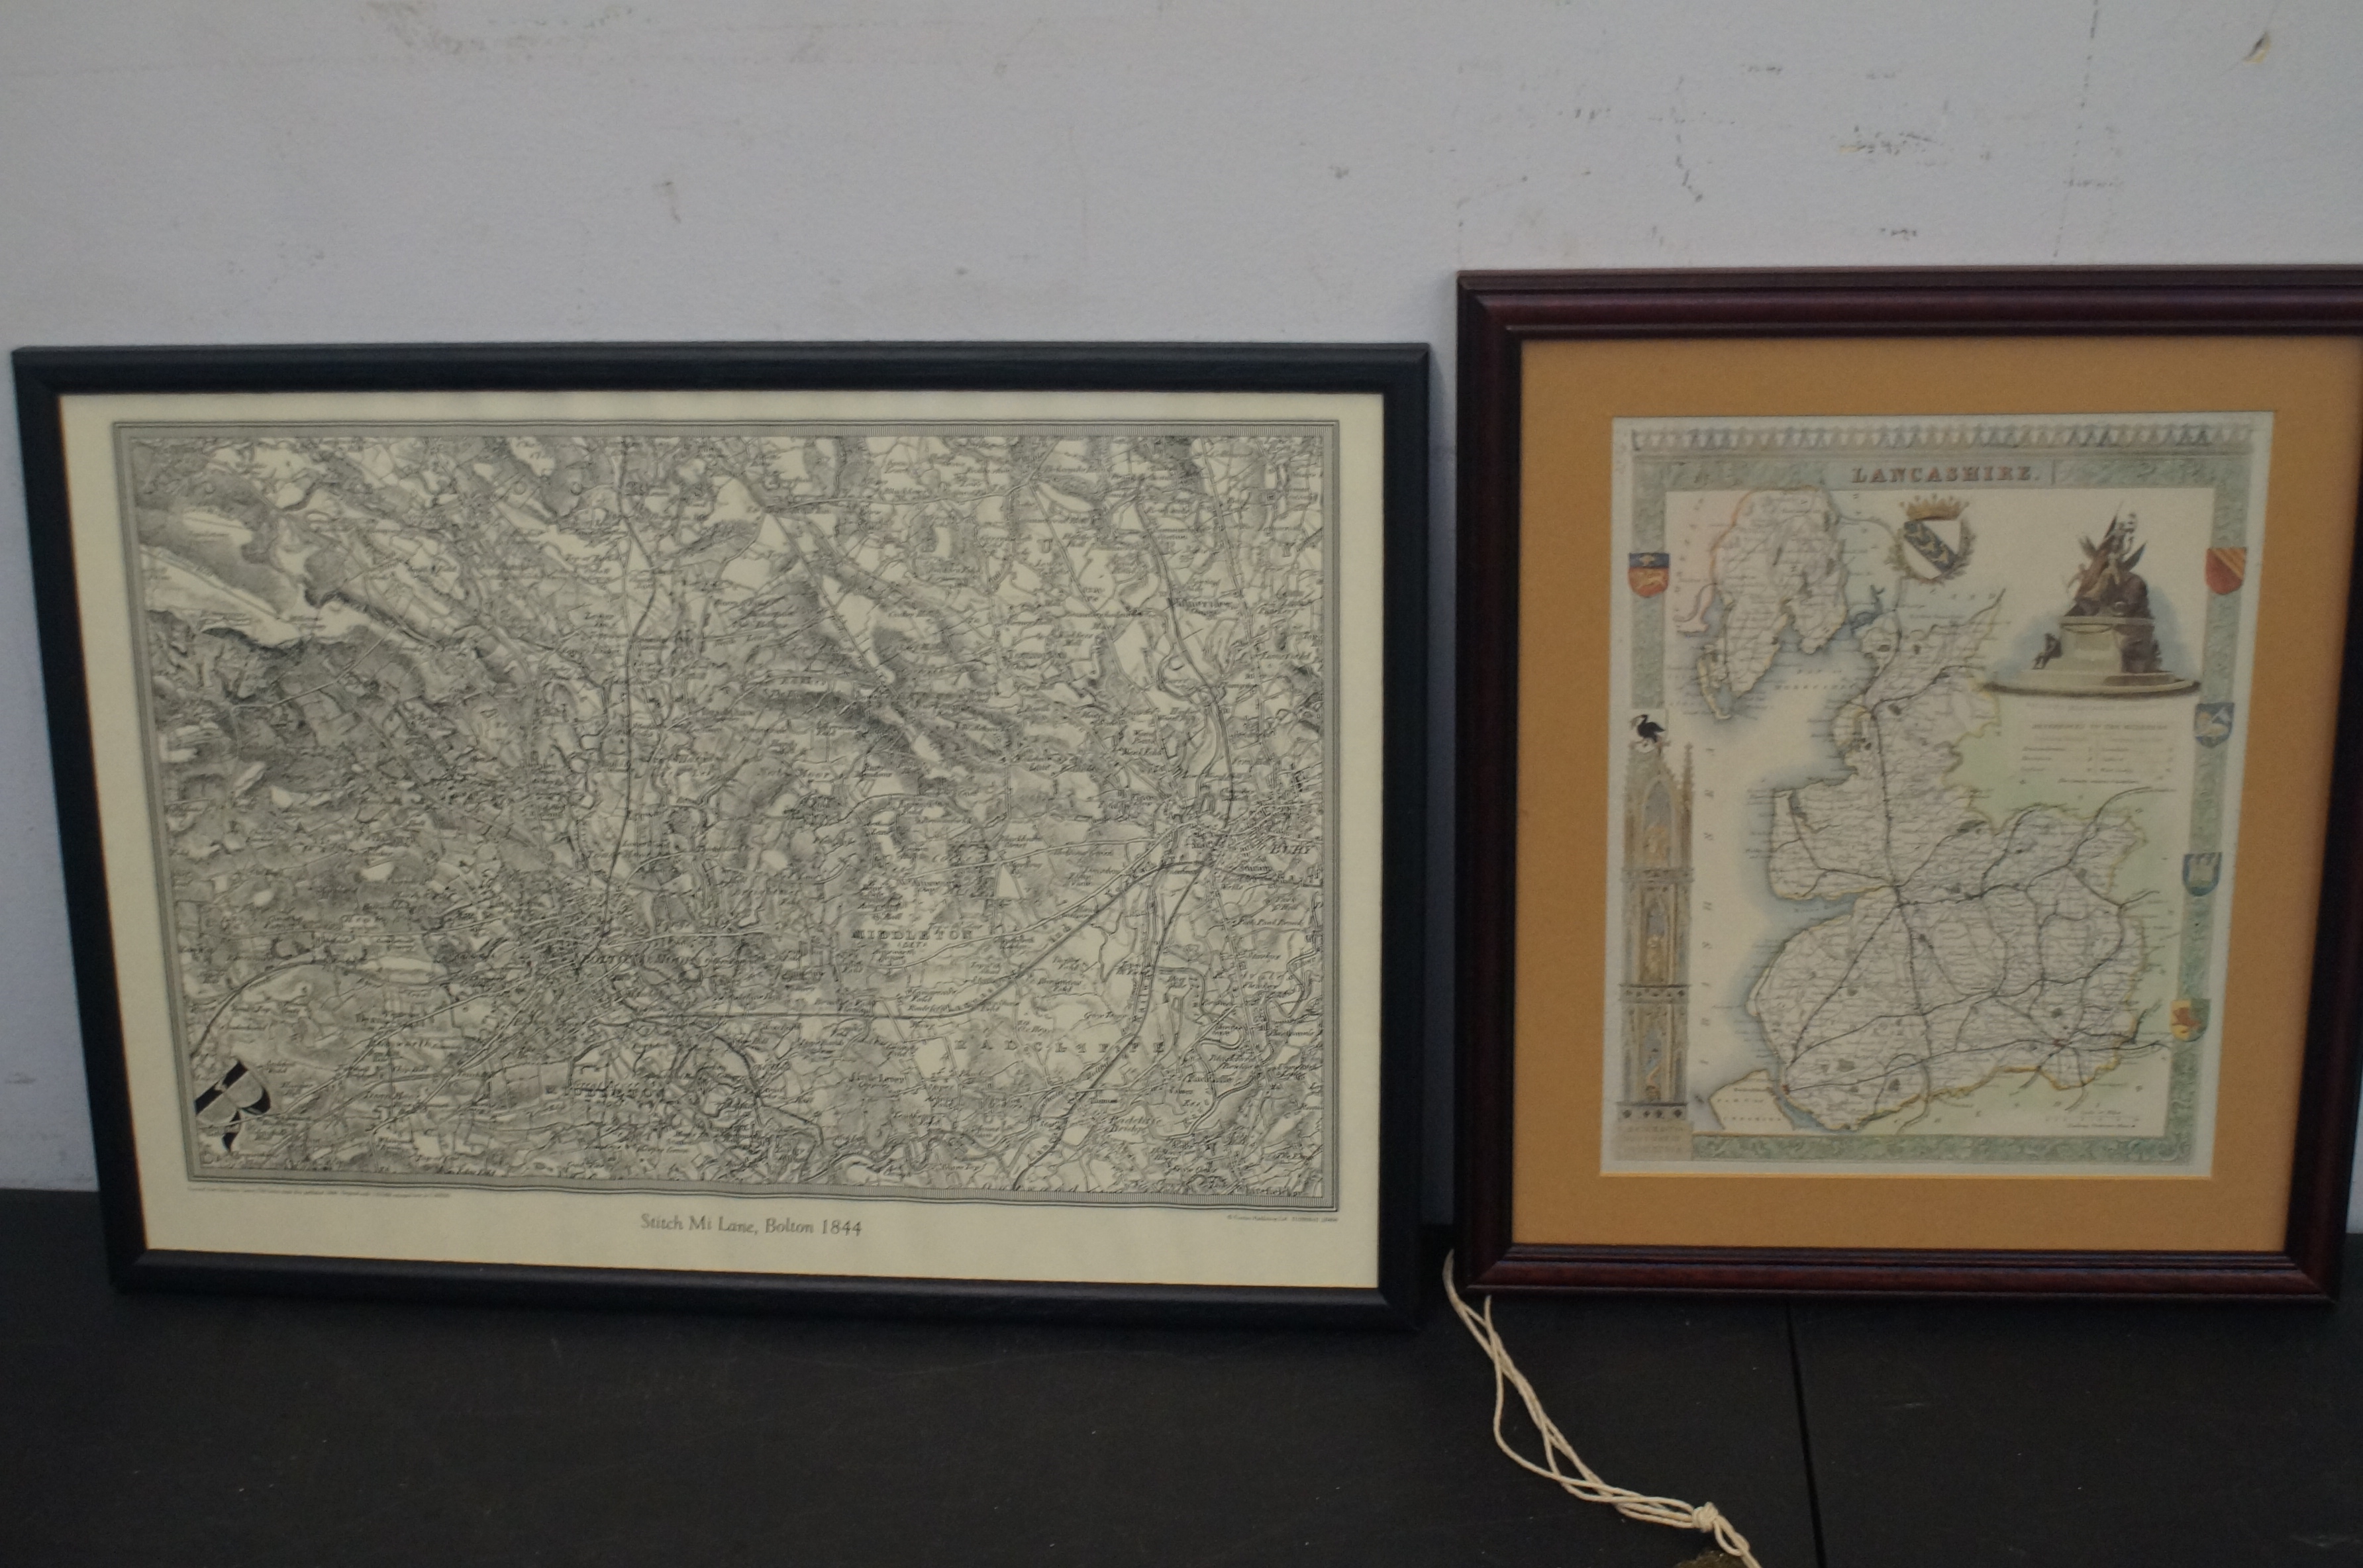 Early Map of Bolton together with a map of Lancash